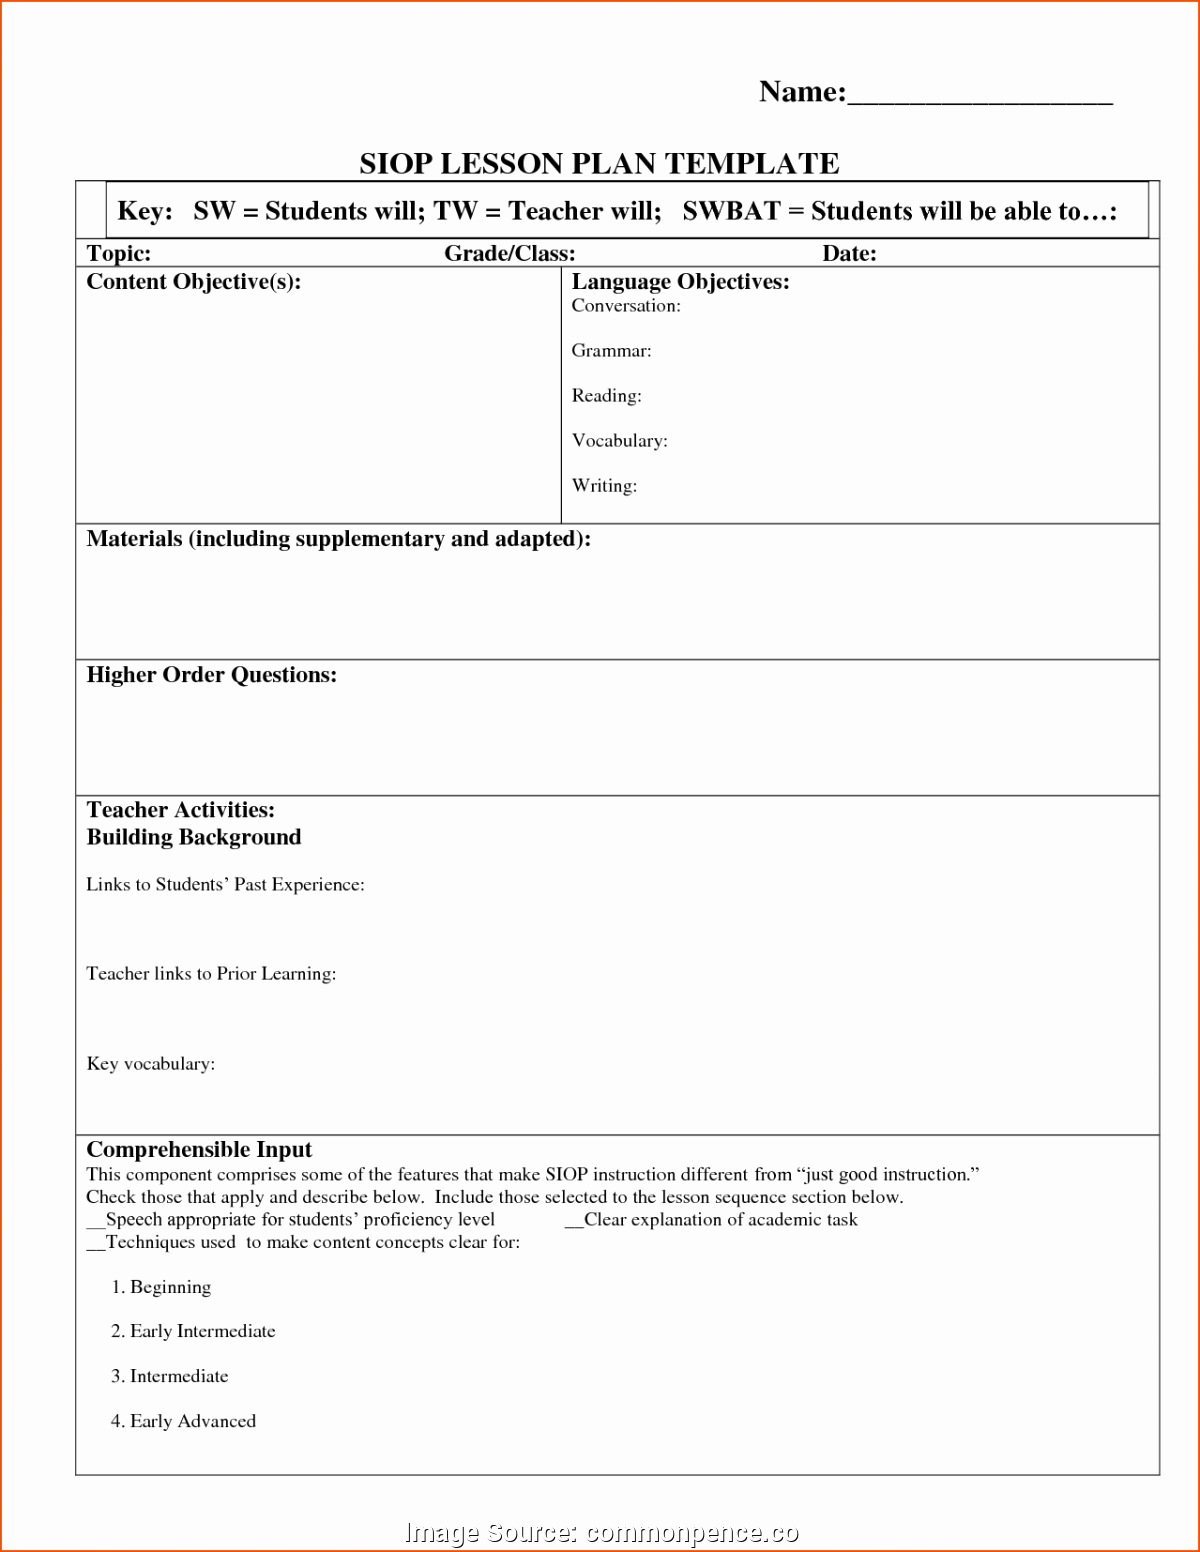 Siop Lesson Plan Template 2 Fresh Valuable Siop Lesson Plan Template 2 Pearson Siop Model